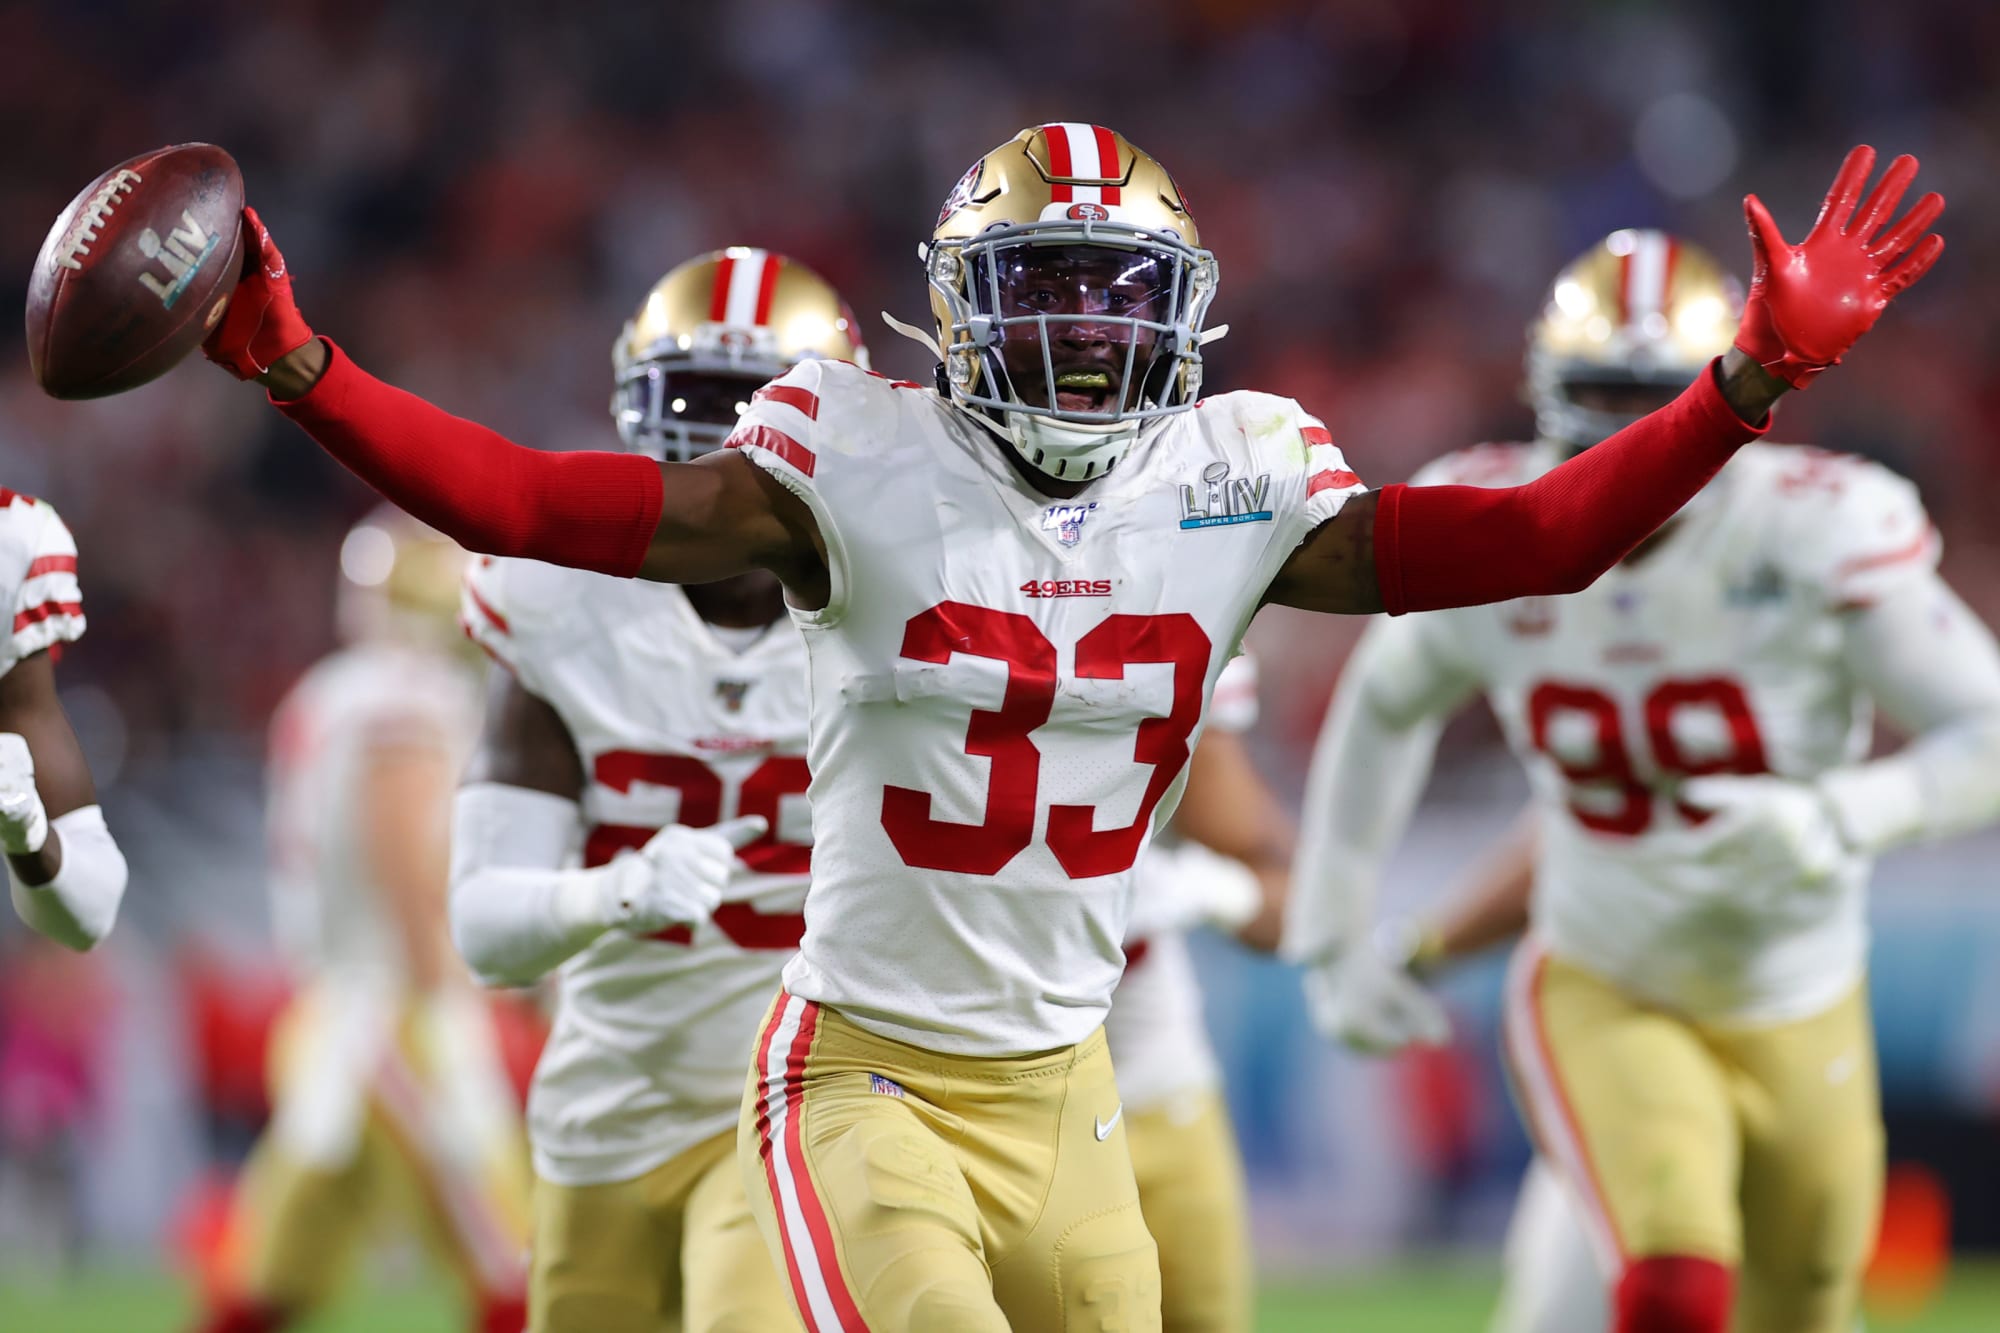 Feb 2, 2020; Miami Gardens, Florida, USA; Former San Francisco 49ers and current Green Bay Packers free safety Tarvarius Moore (33) celebrates after an interception against the Kansas City Chiefs during the fourth quarter in Super Bowl LIV at Hard Rock Stadium. Mandatory Credit: John David Mercer-USA TODAY Sports